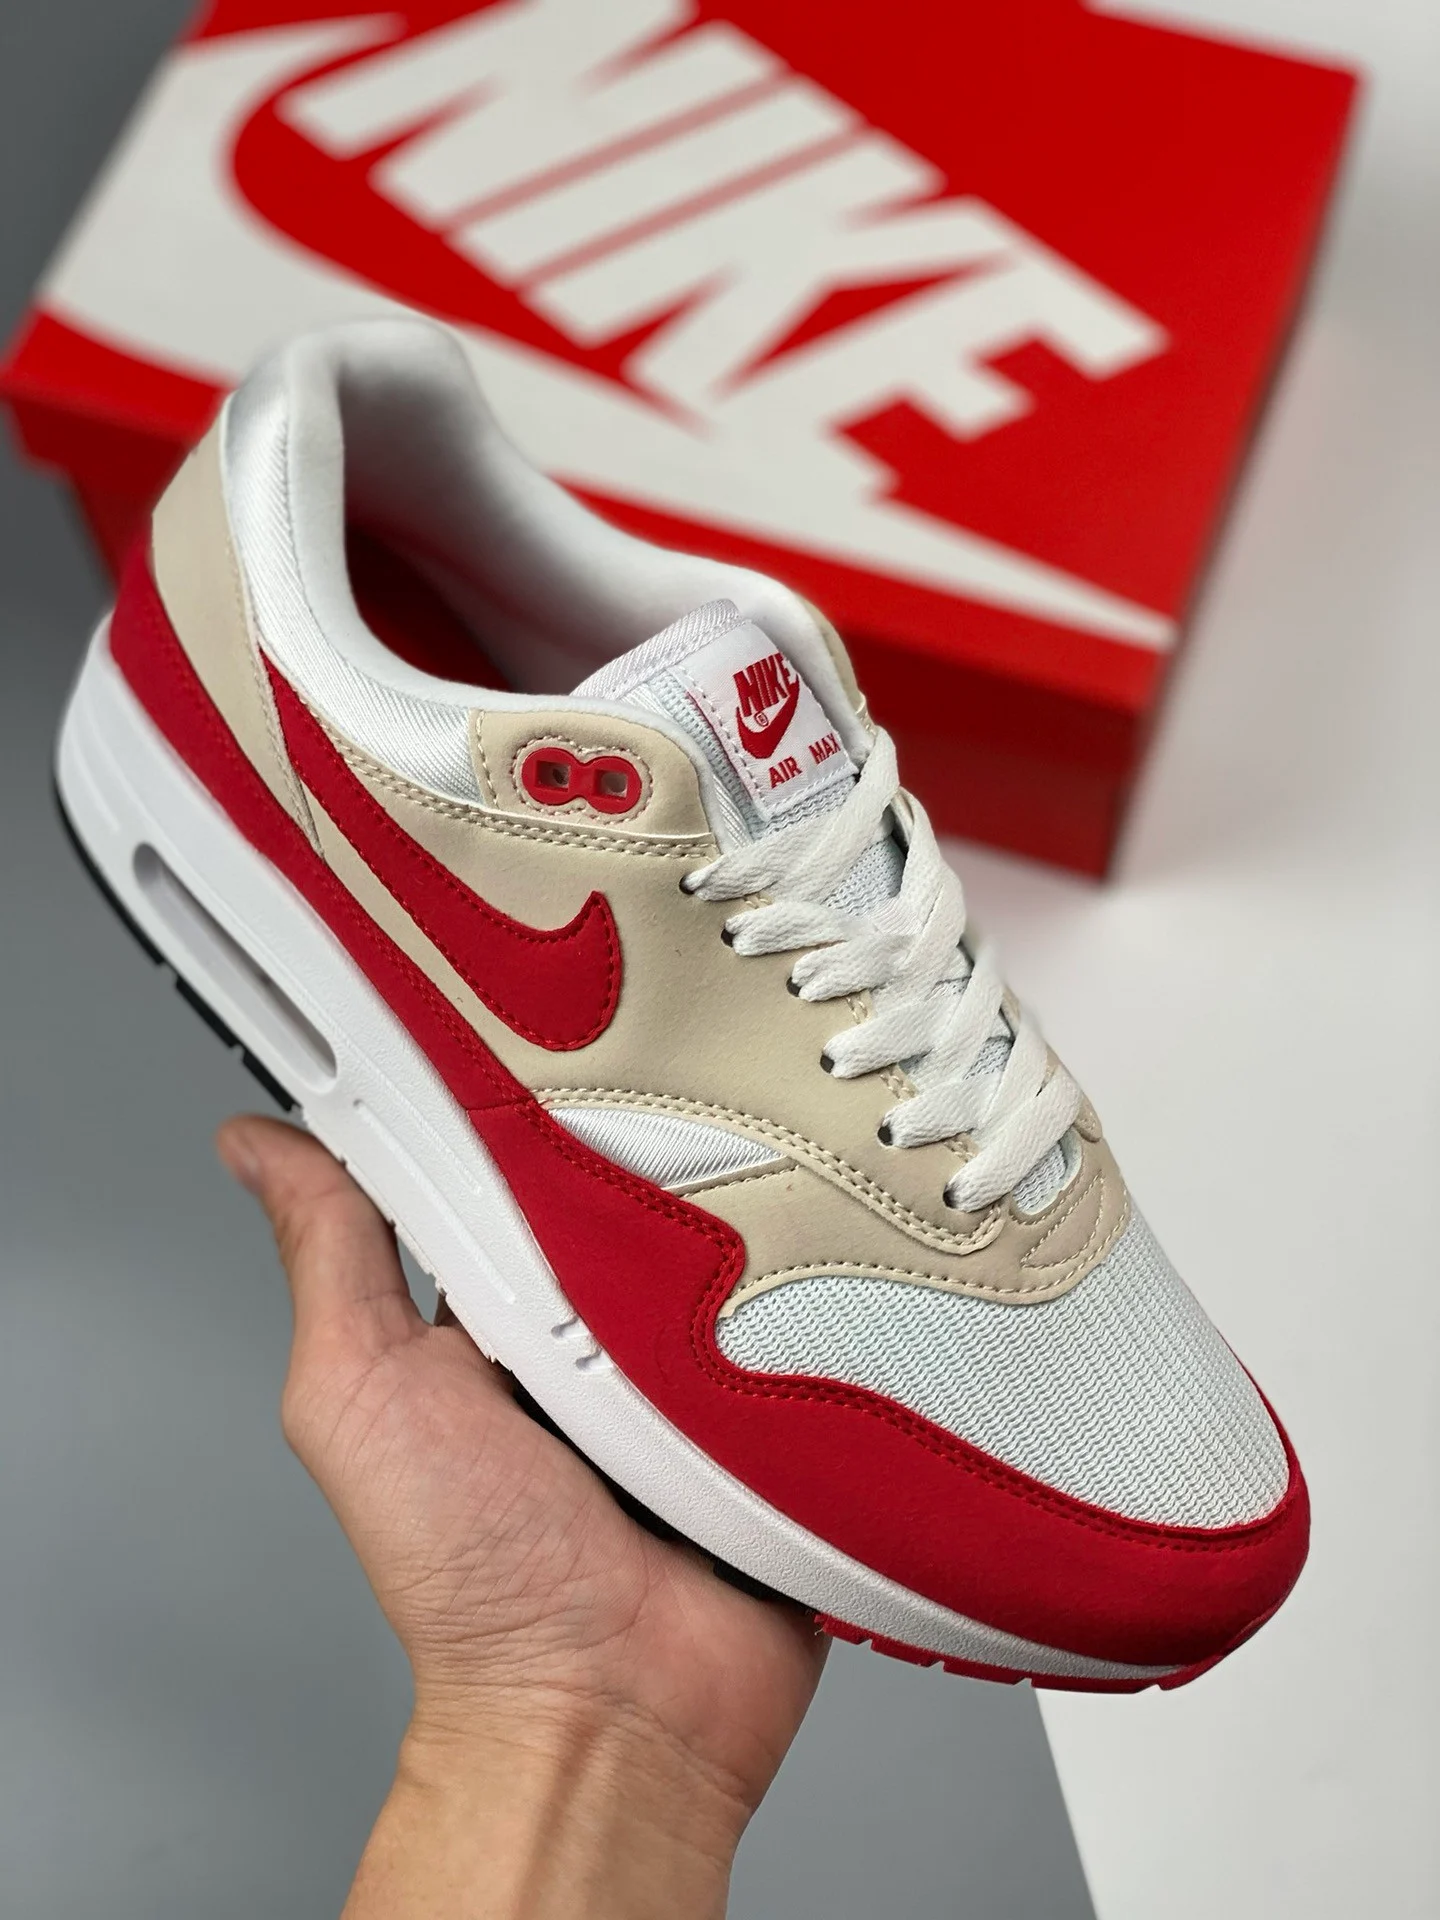 Nike Air Max 1 Anniversary White University Red 908375-103 For Sale